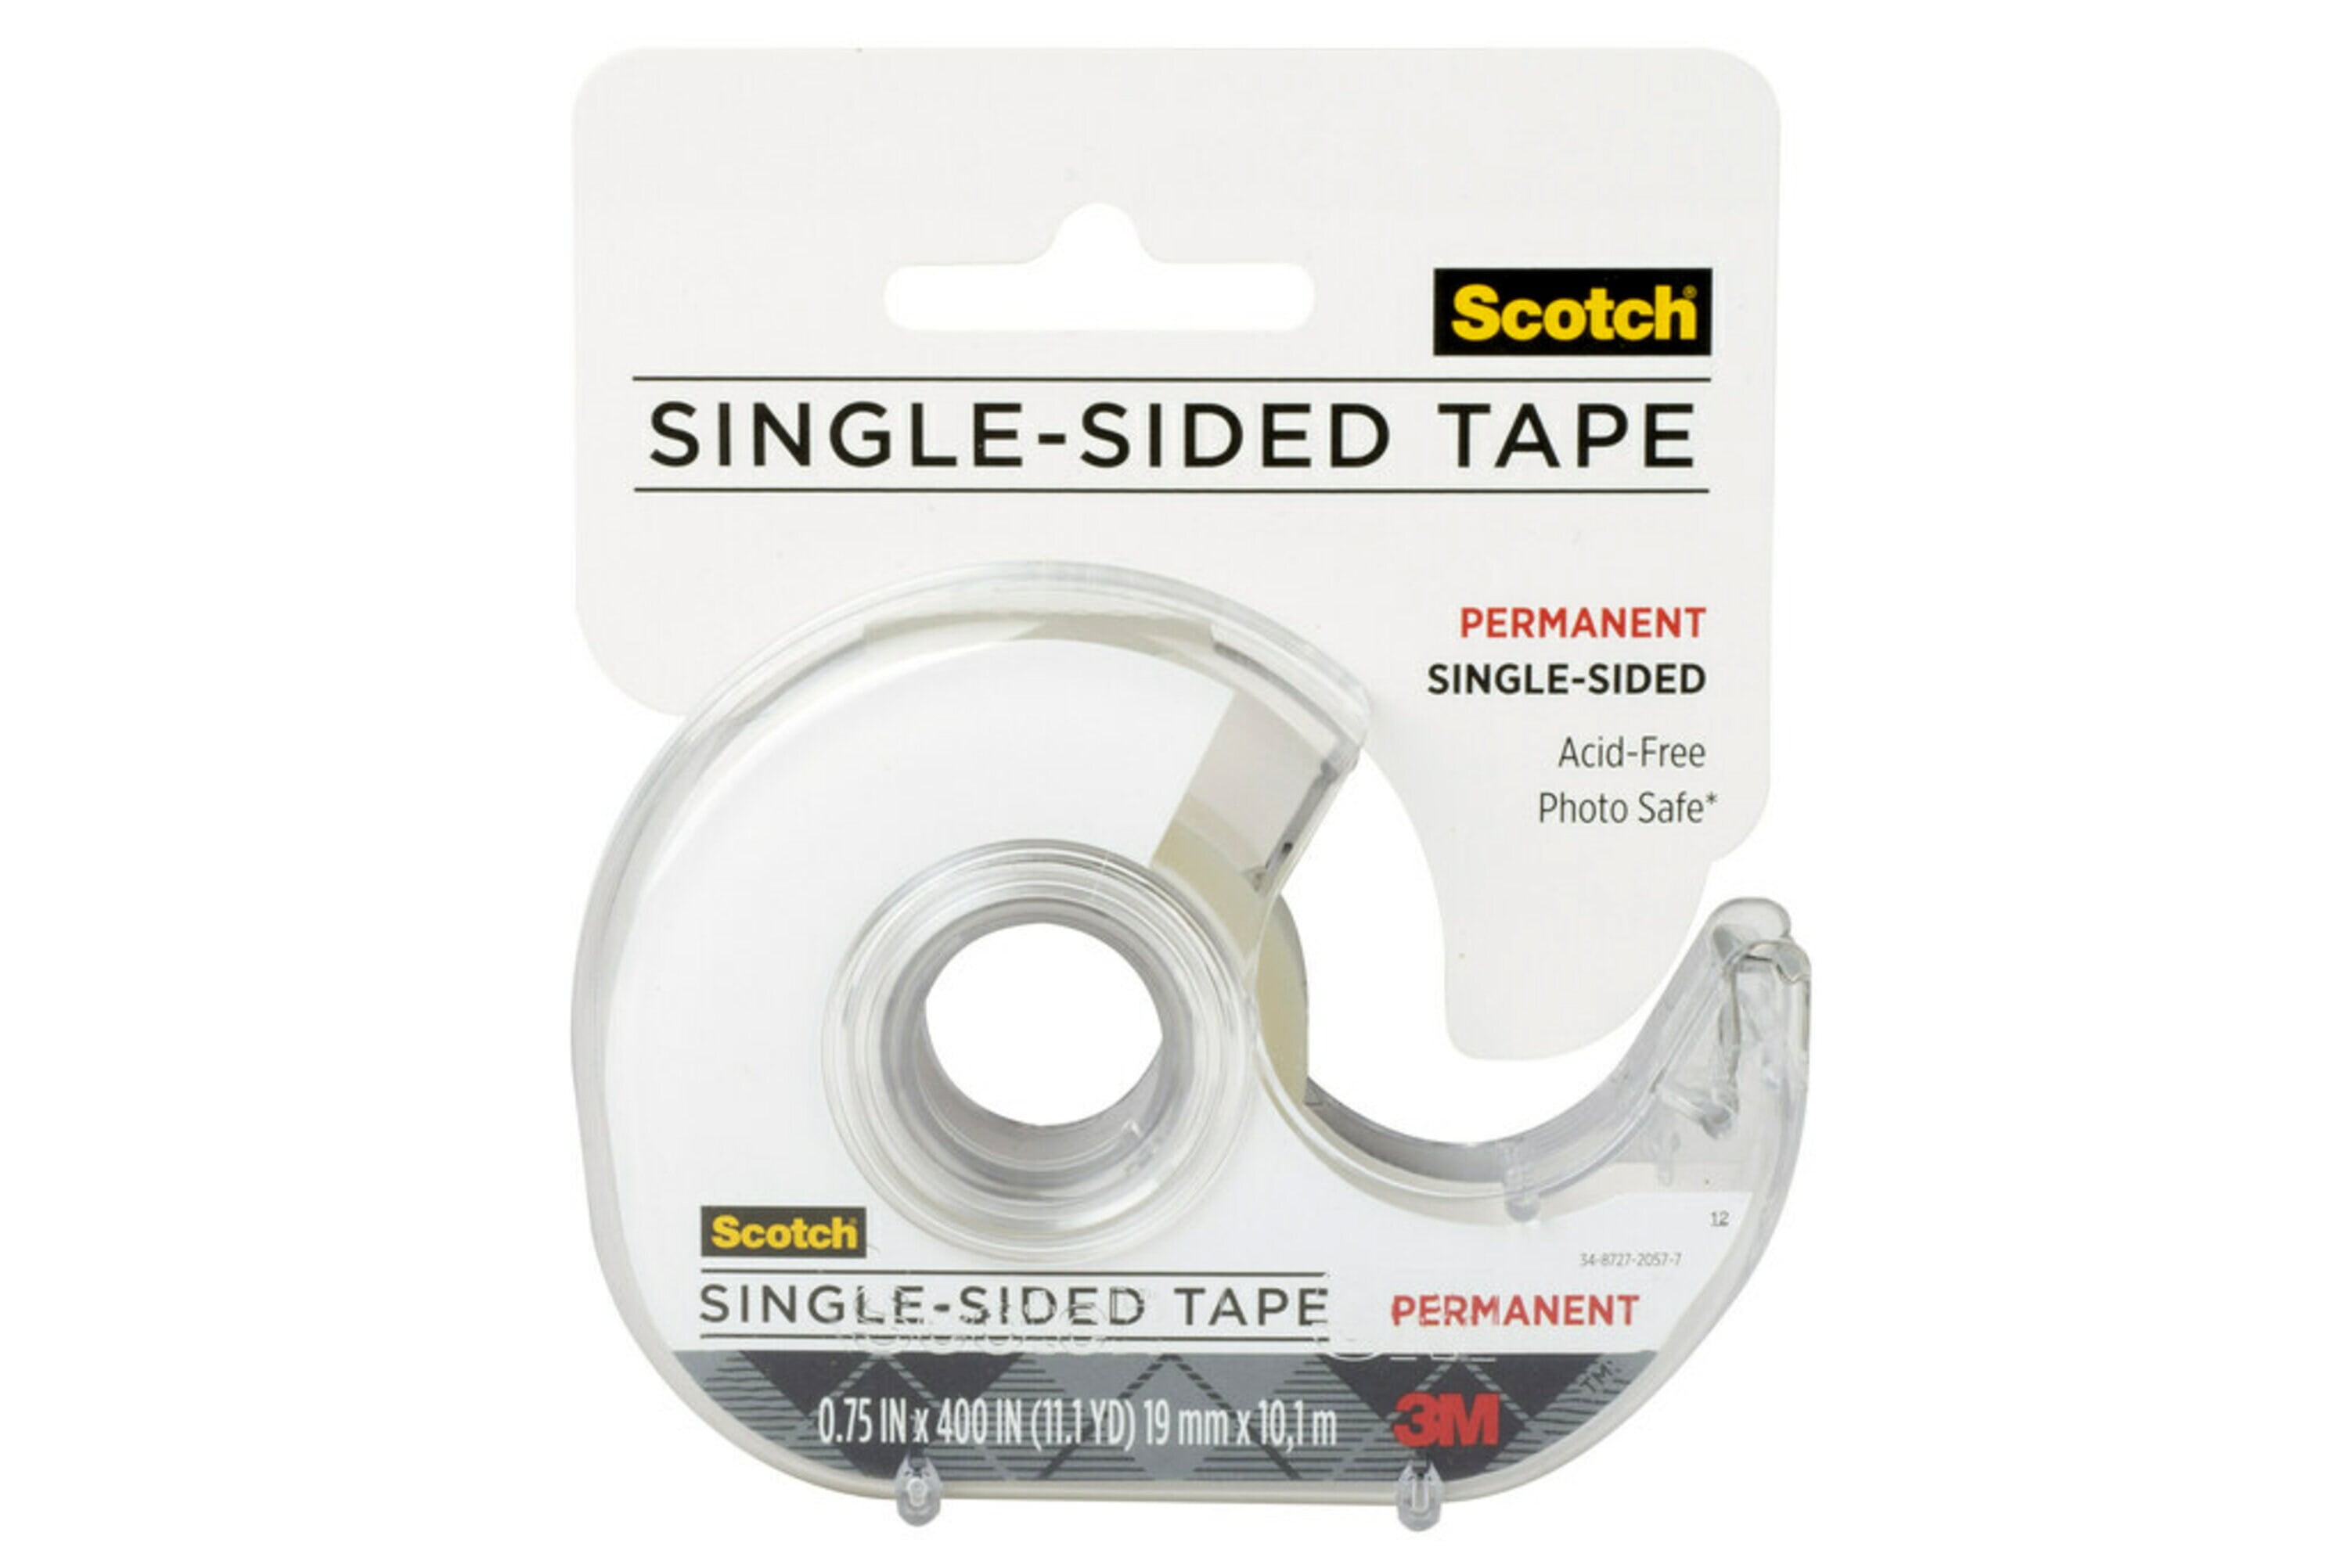 Shop Scotch Wall Safe Tape with great discounts and prices online - Jan  2024